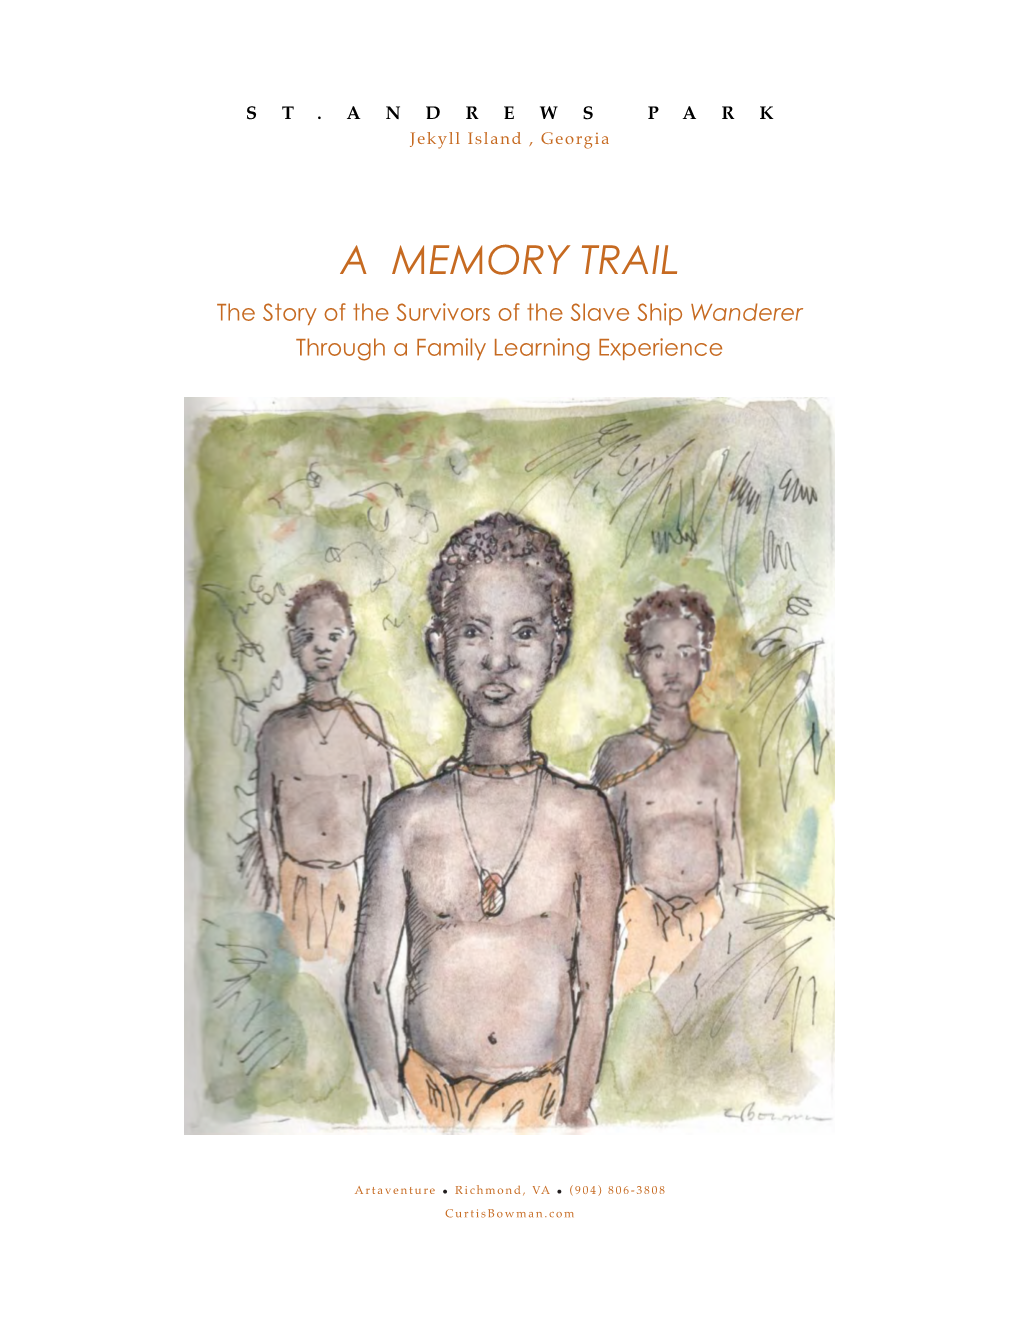 A MEMORY TRAIL the Story of the Survivors of the Slave Ship Wanderer Through a Family Learning Experience